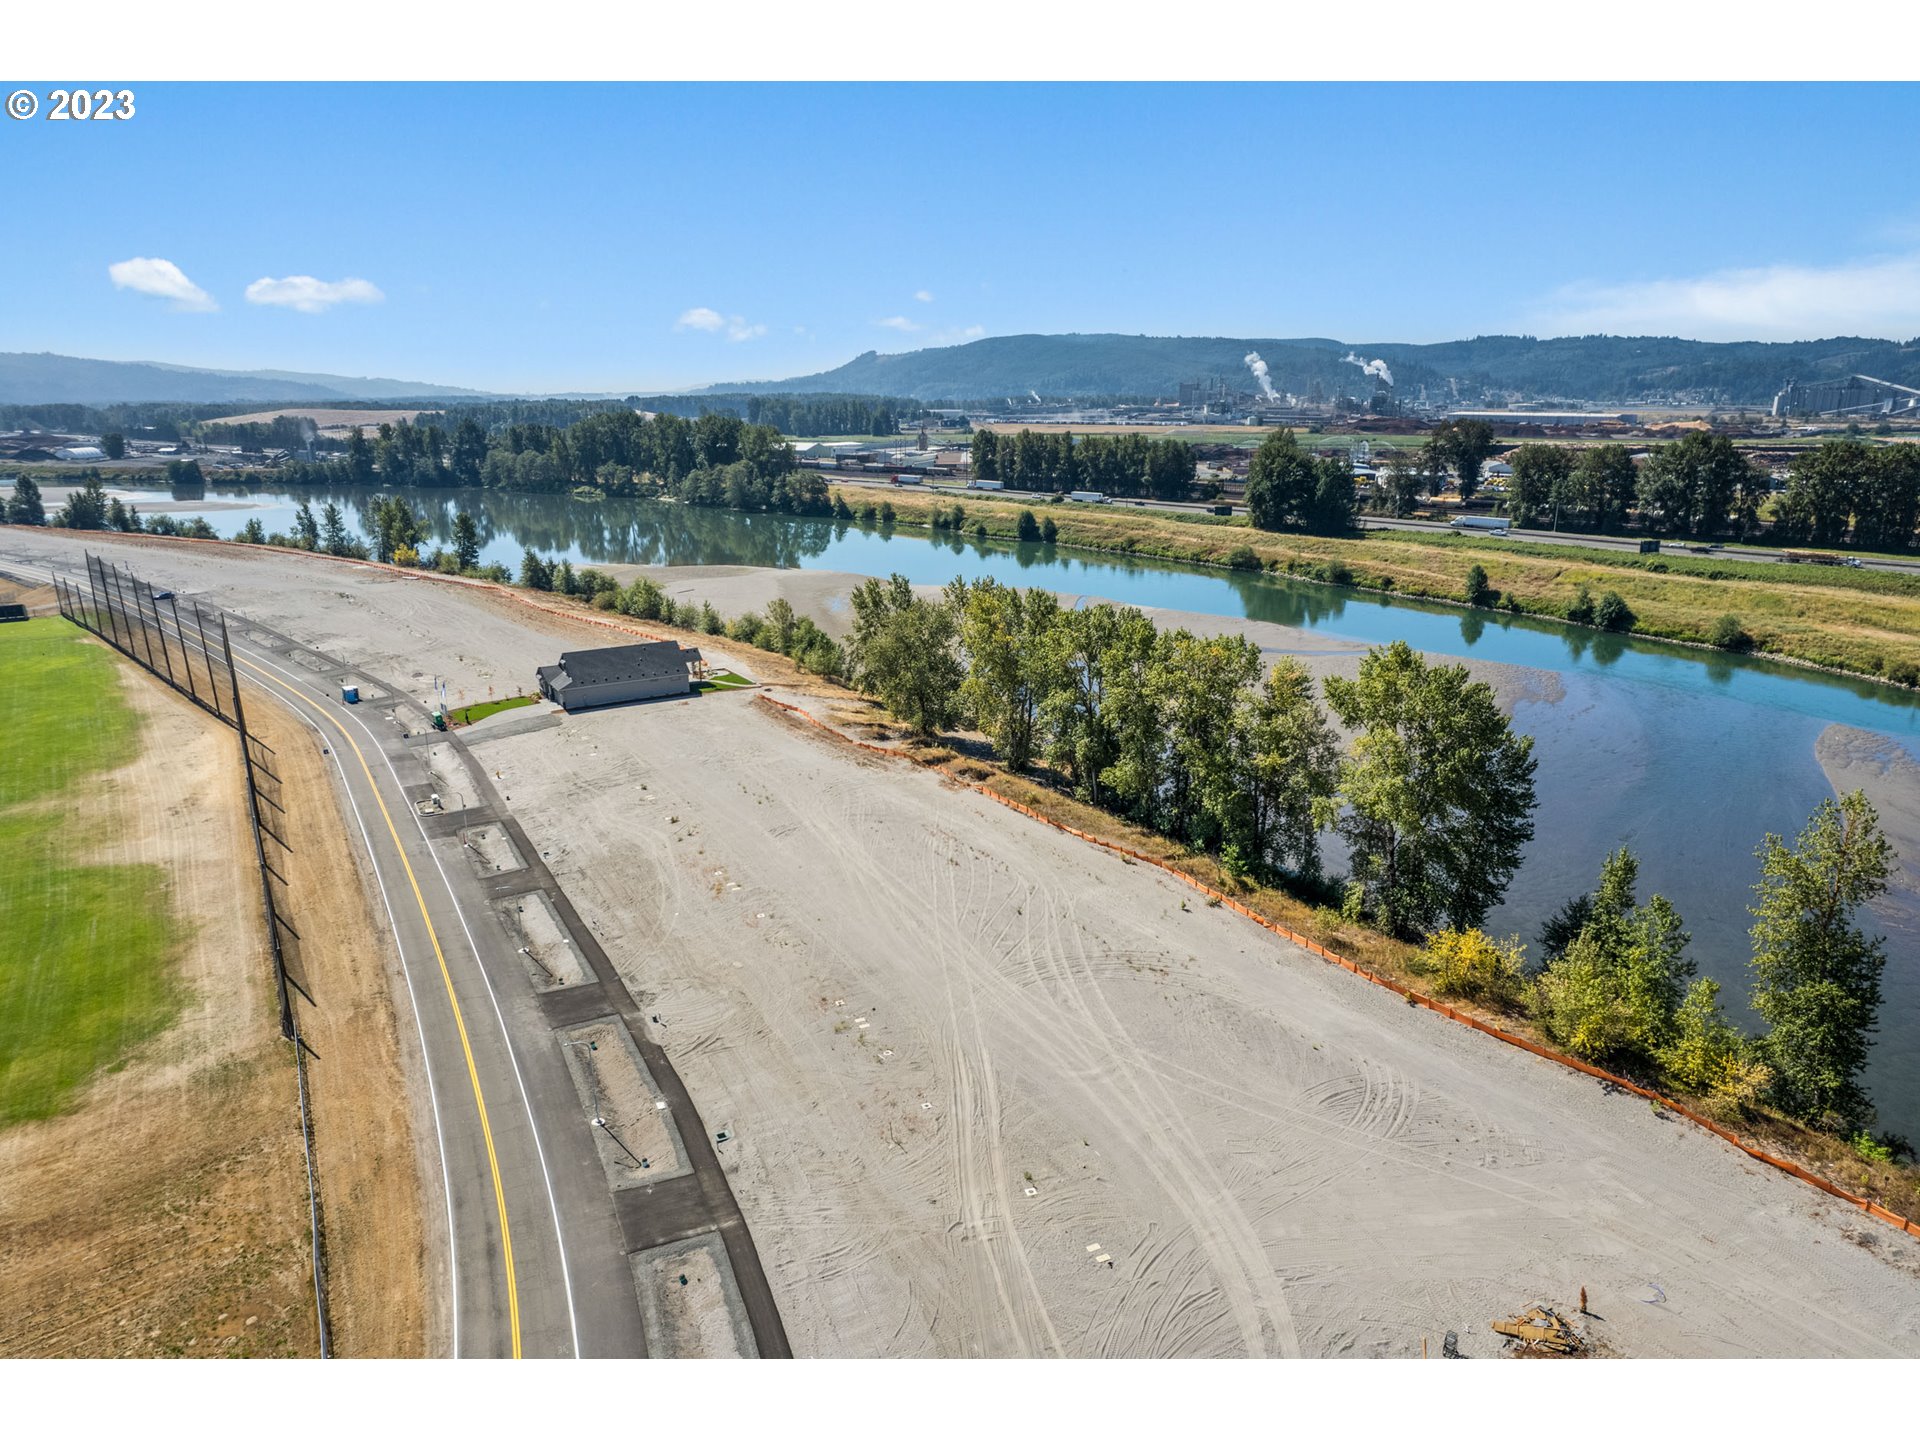 2040 S River Rd, Kelso, WA 98626